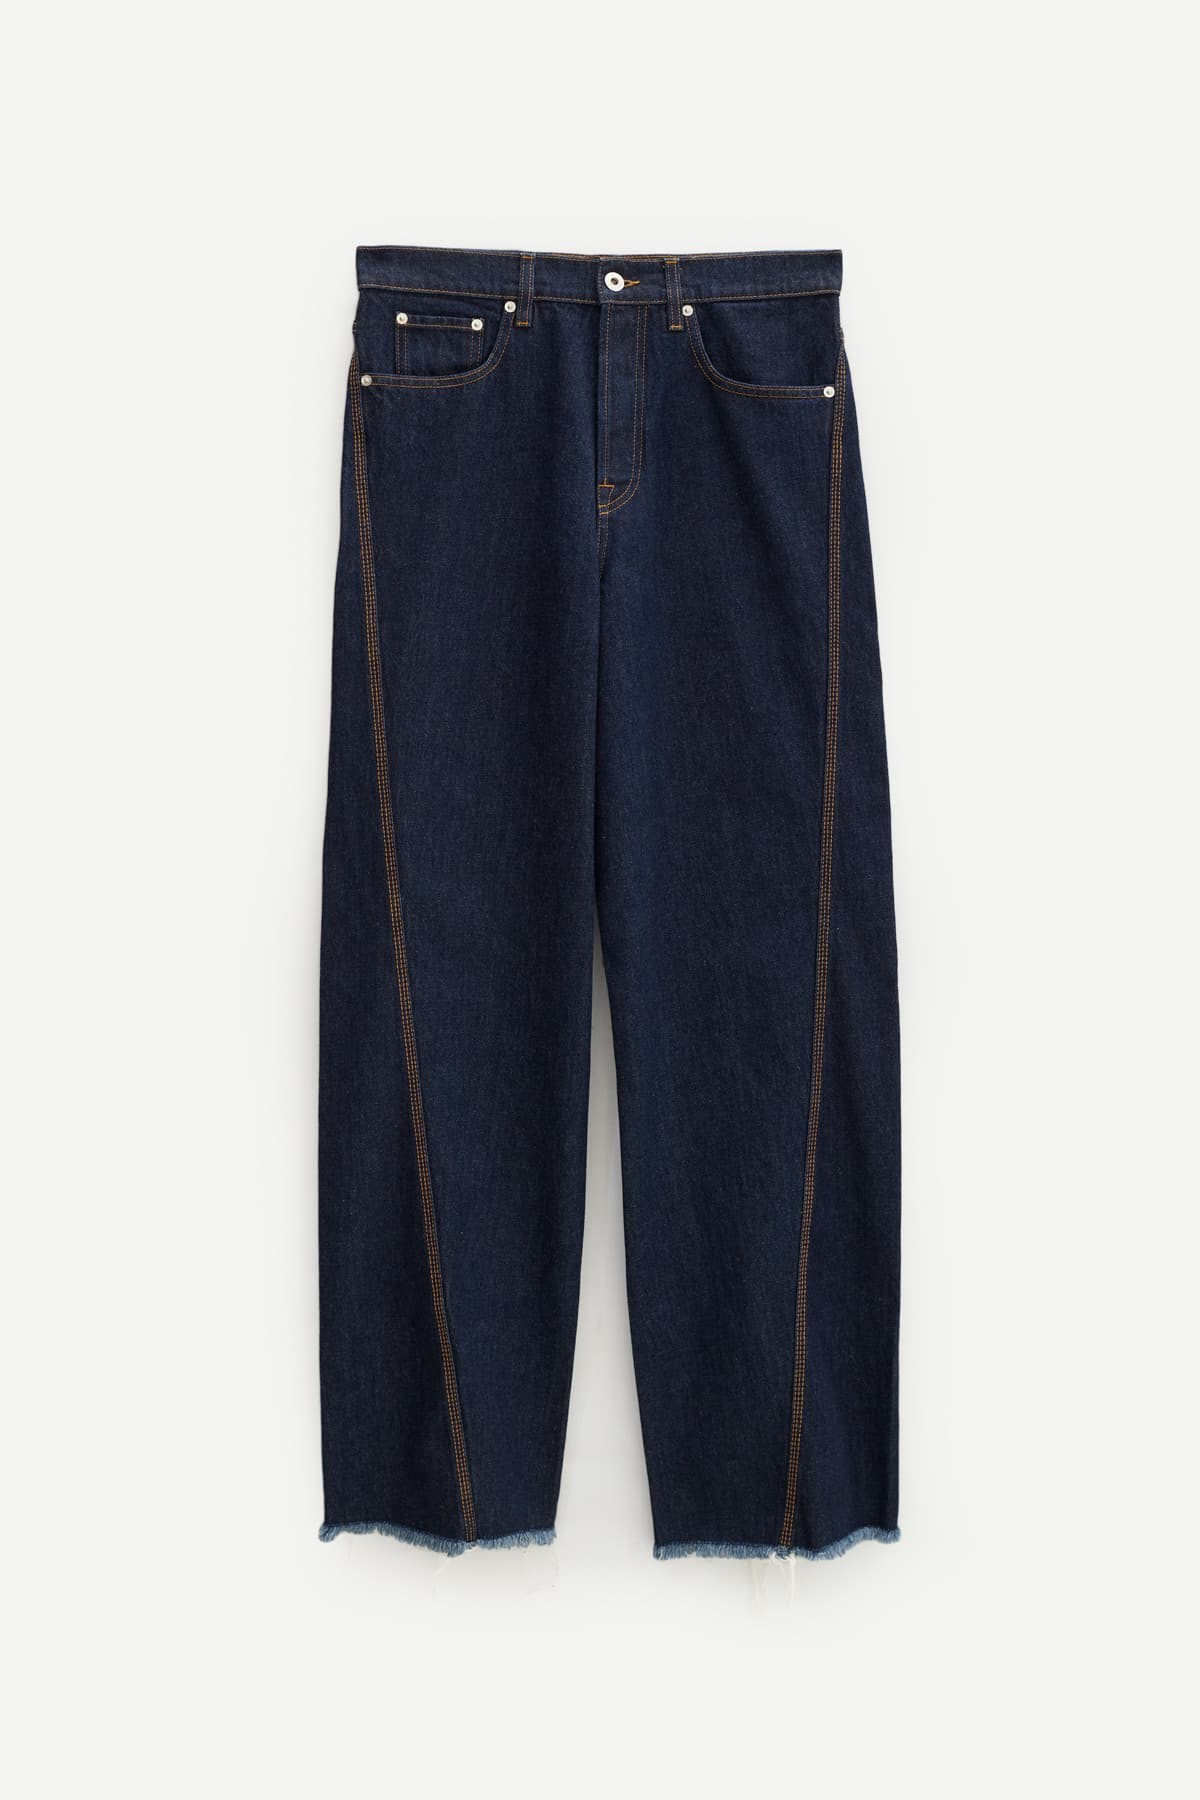 LANVIN NAVY BLUE TWISTED DENIM BAGGY TROUSERS IAMNUE